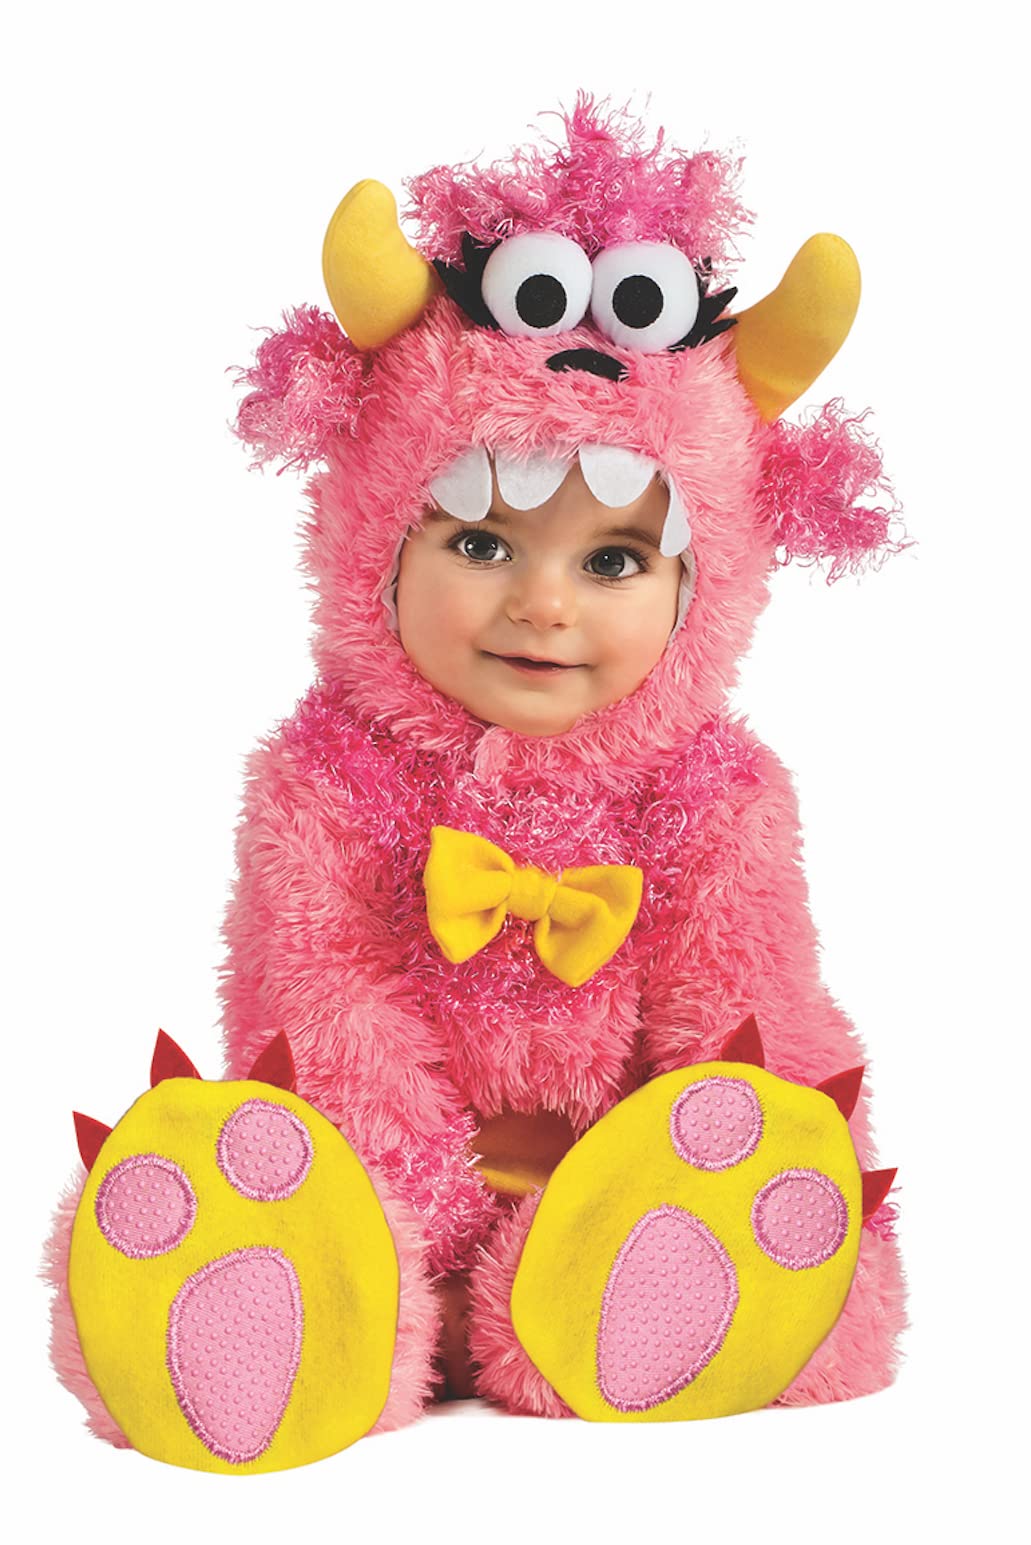 Rubie's Costume Noah's Ark Pinky Winky Monster Romper( 6-18 months) $17.95 + Free Shipping w/ Prime or on orders $35+